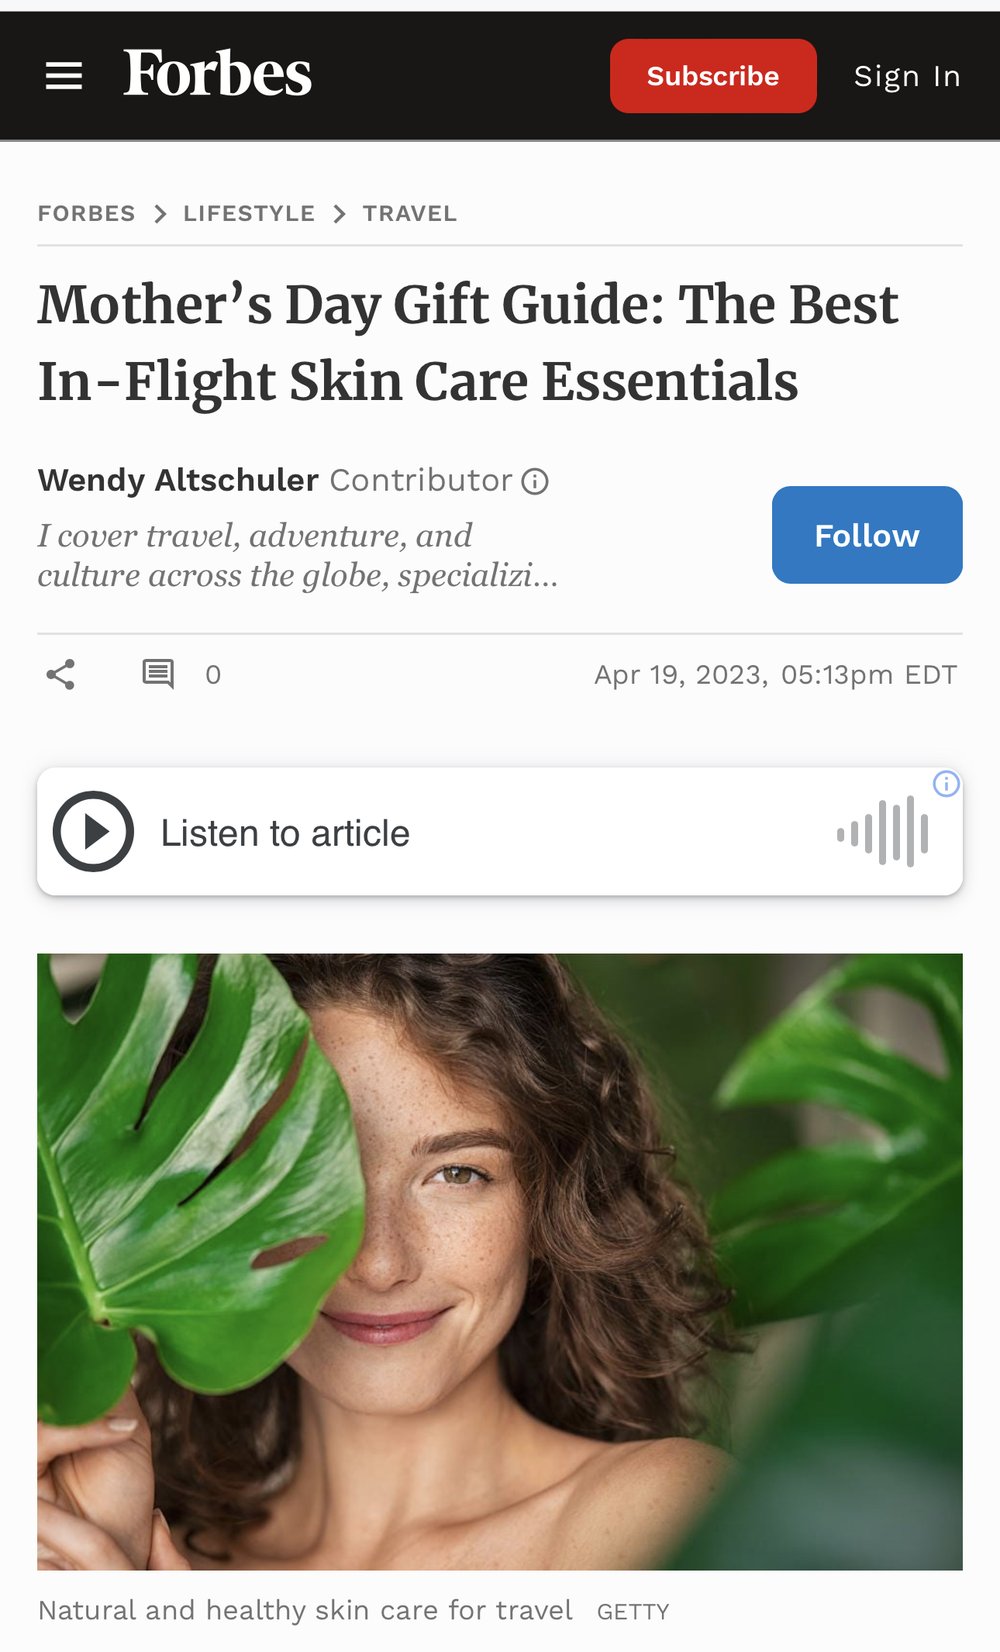 Mother’s Day Gift Guide: The Best In-Flight Skin Care Essentials